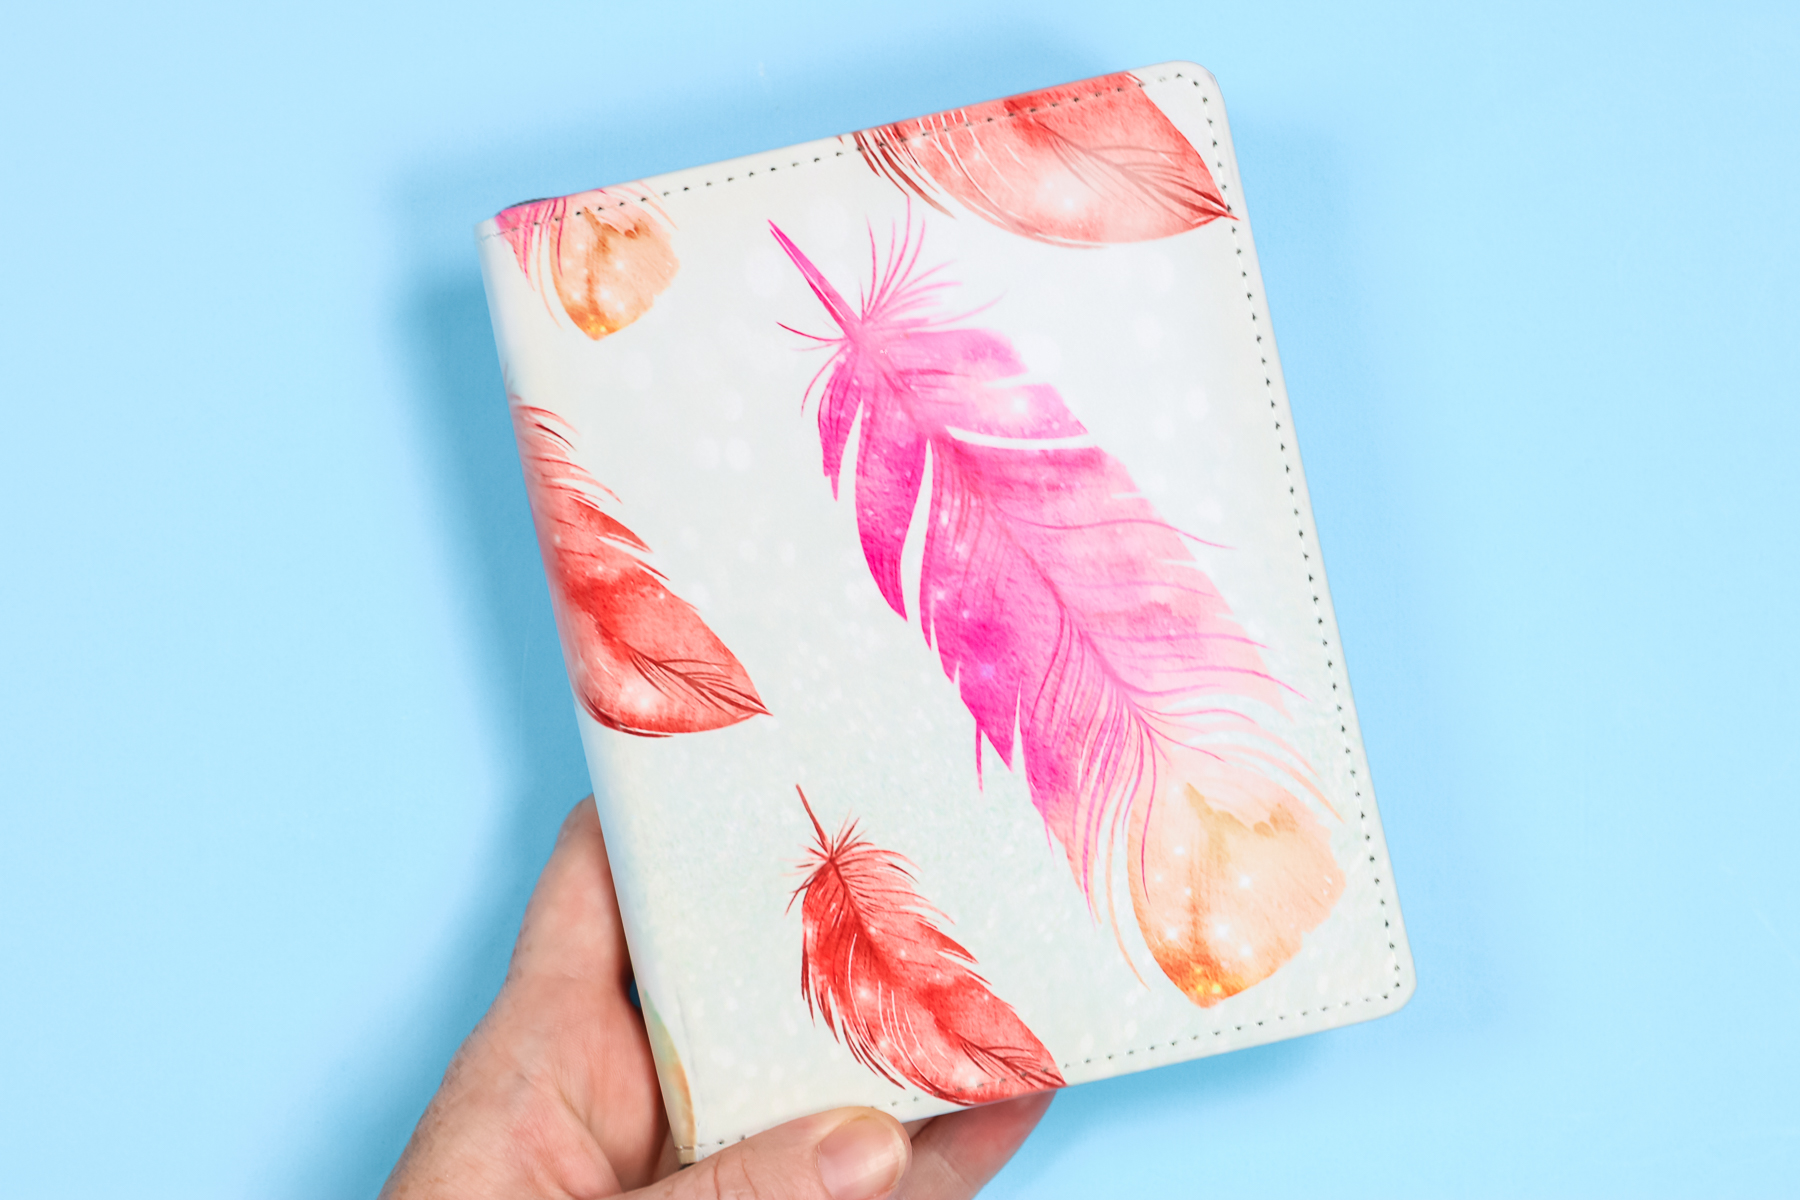 Plastic Sublimation Notebook with Side Cover